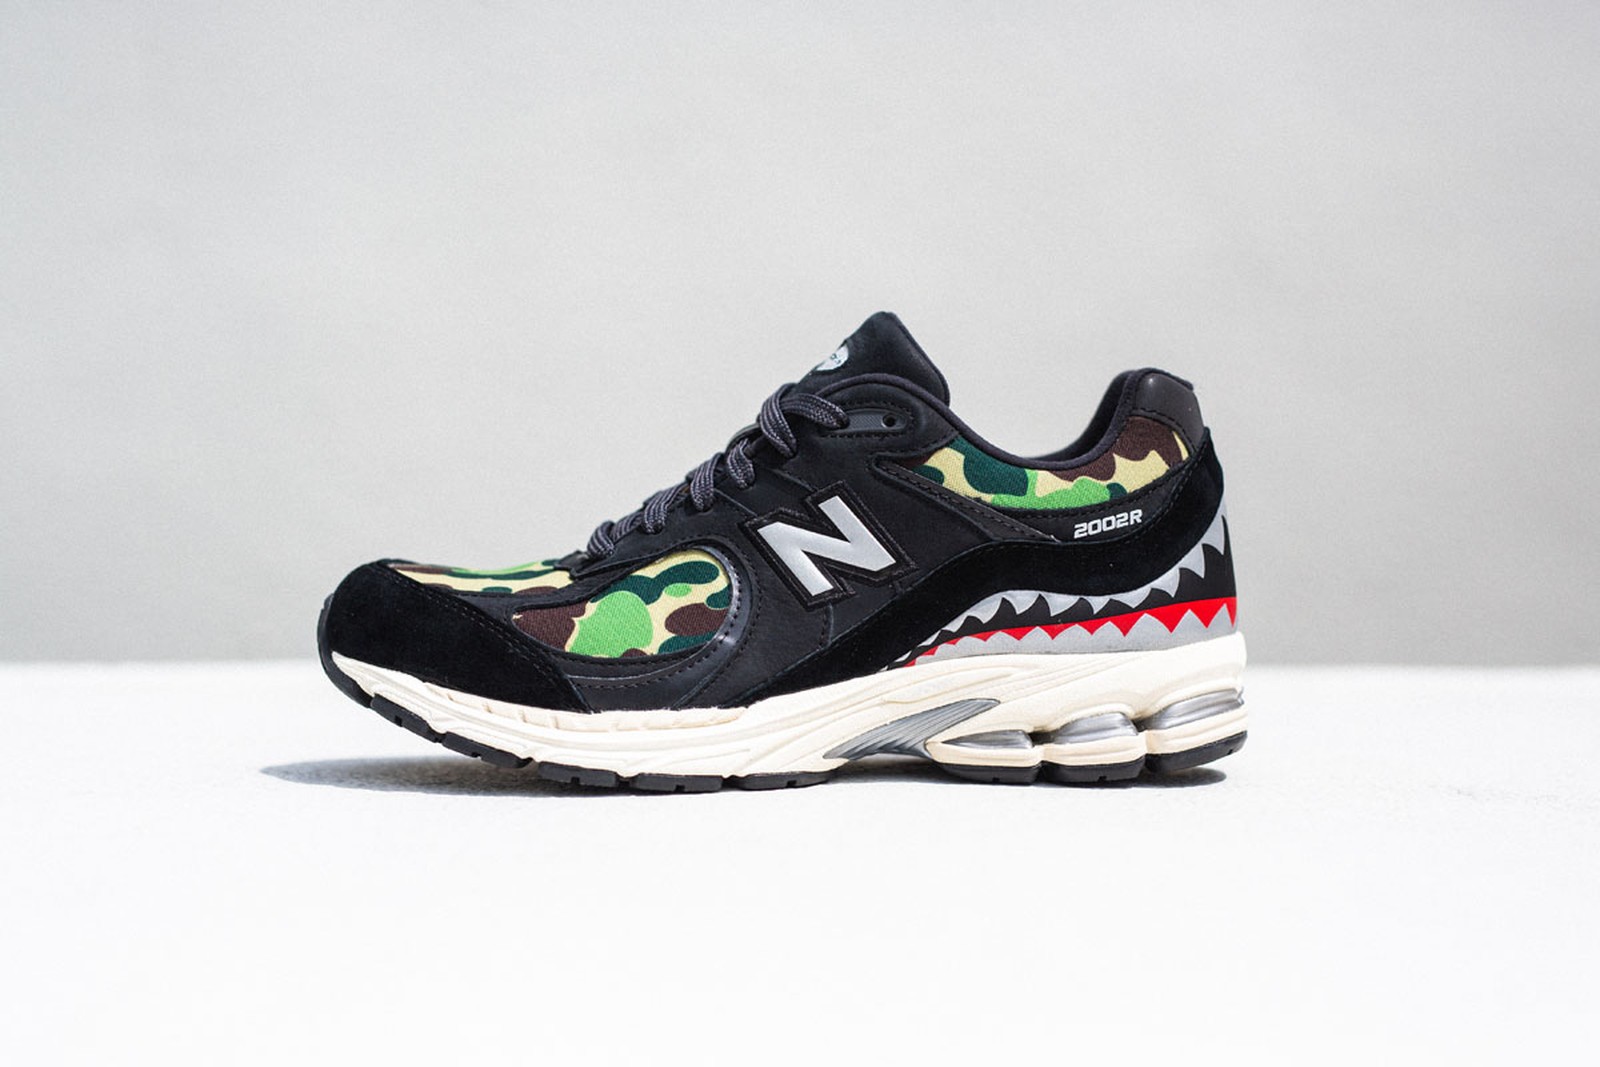 Detailed Look at the BAPE x New Balance 2002R